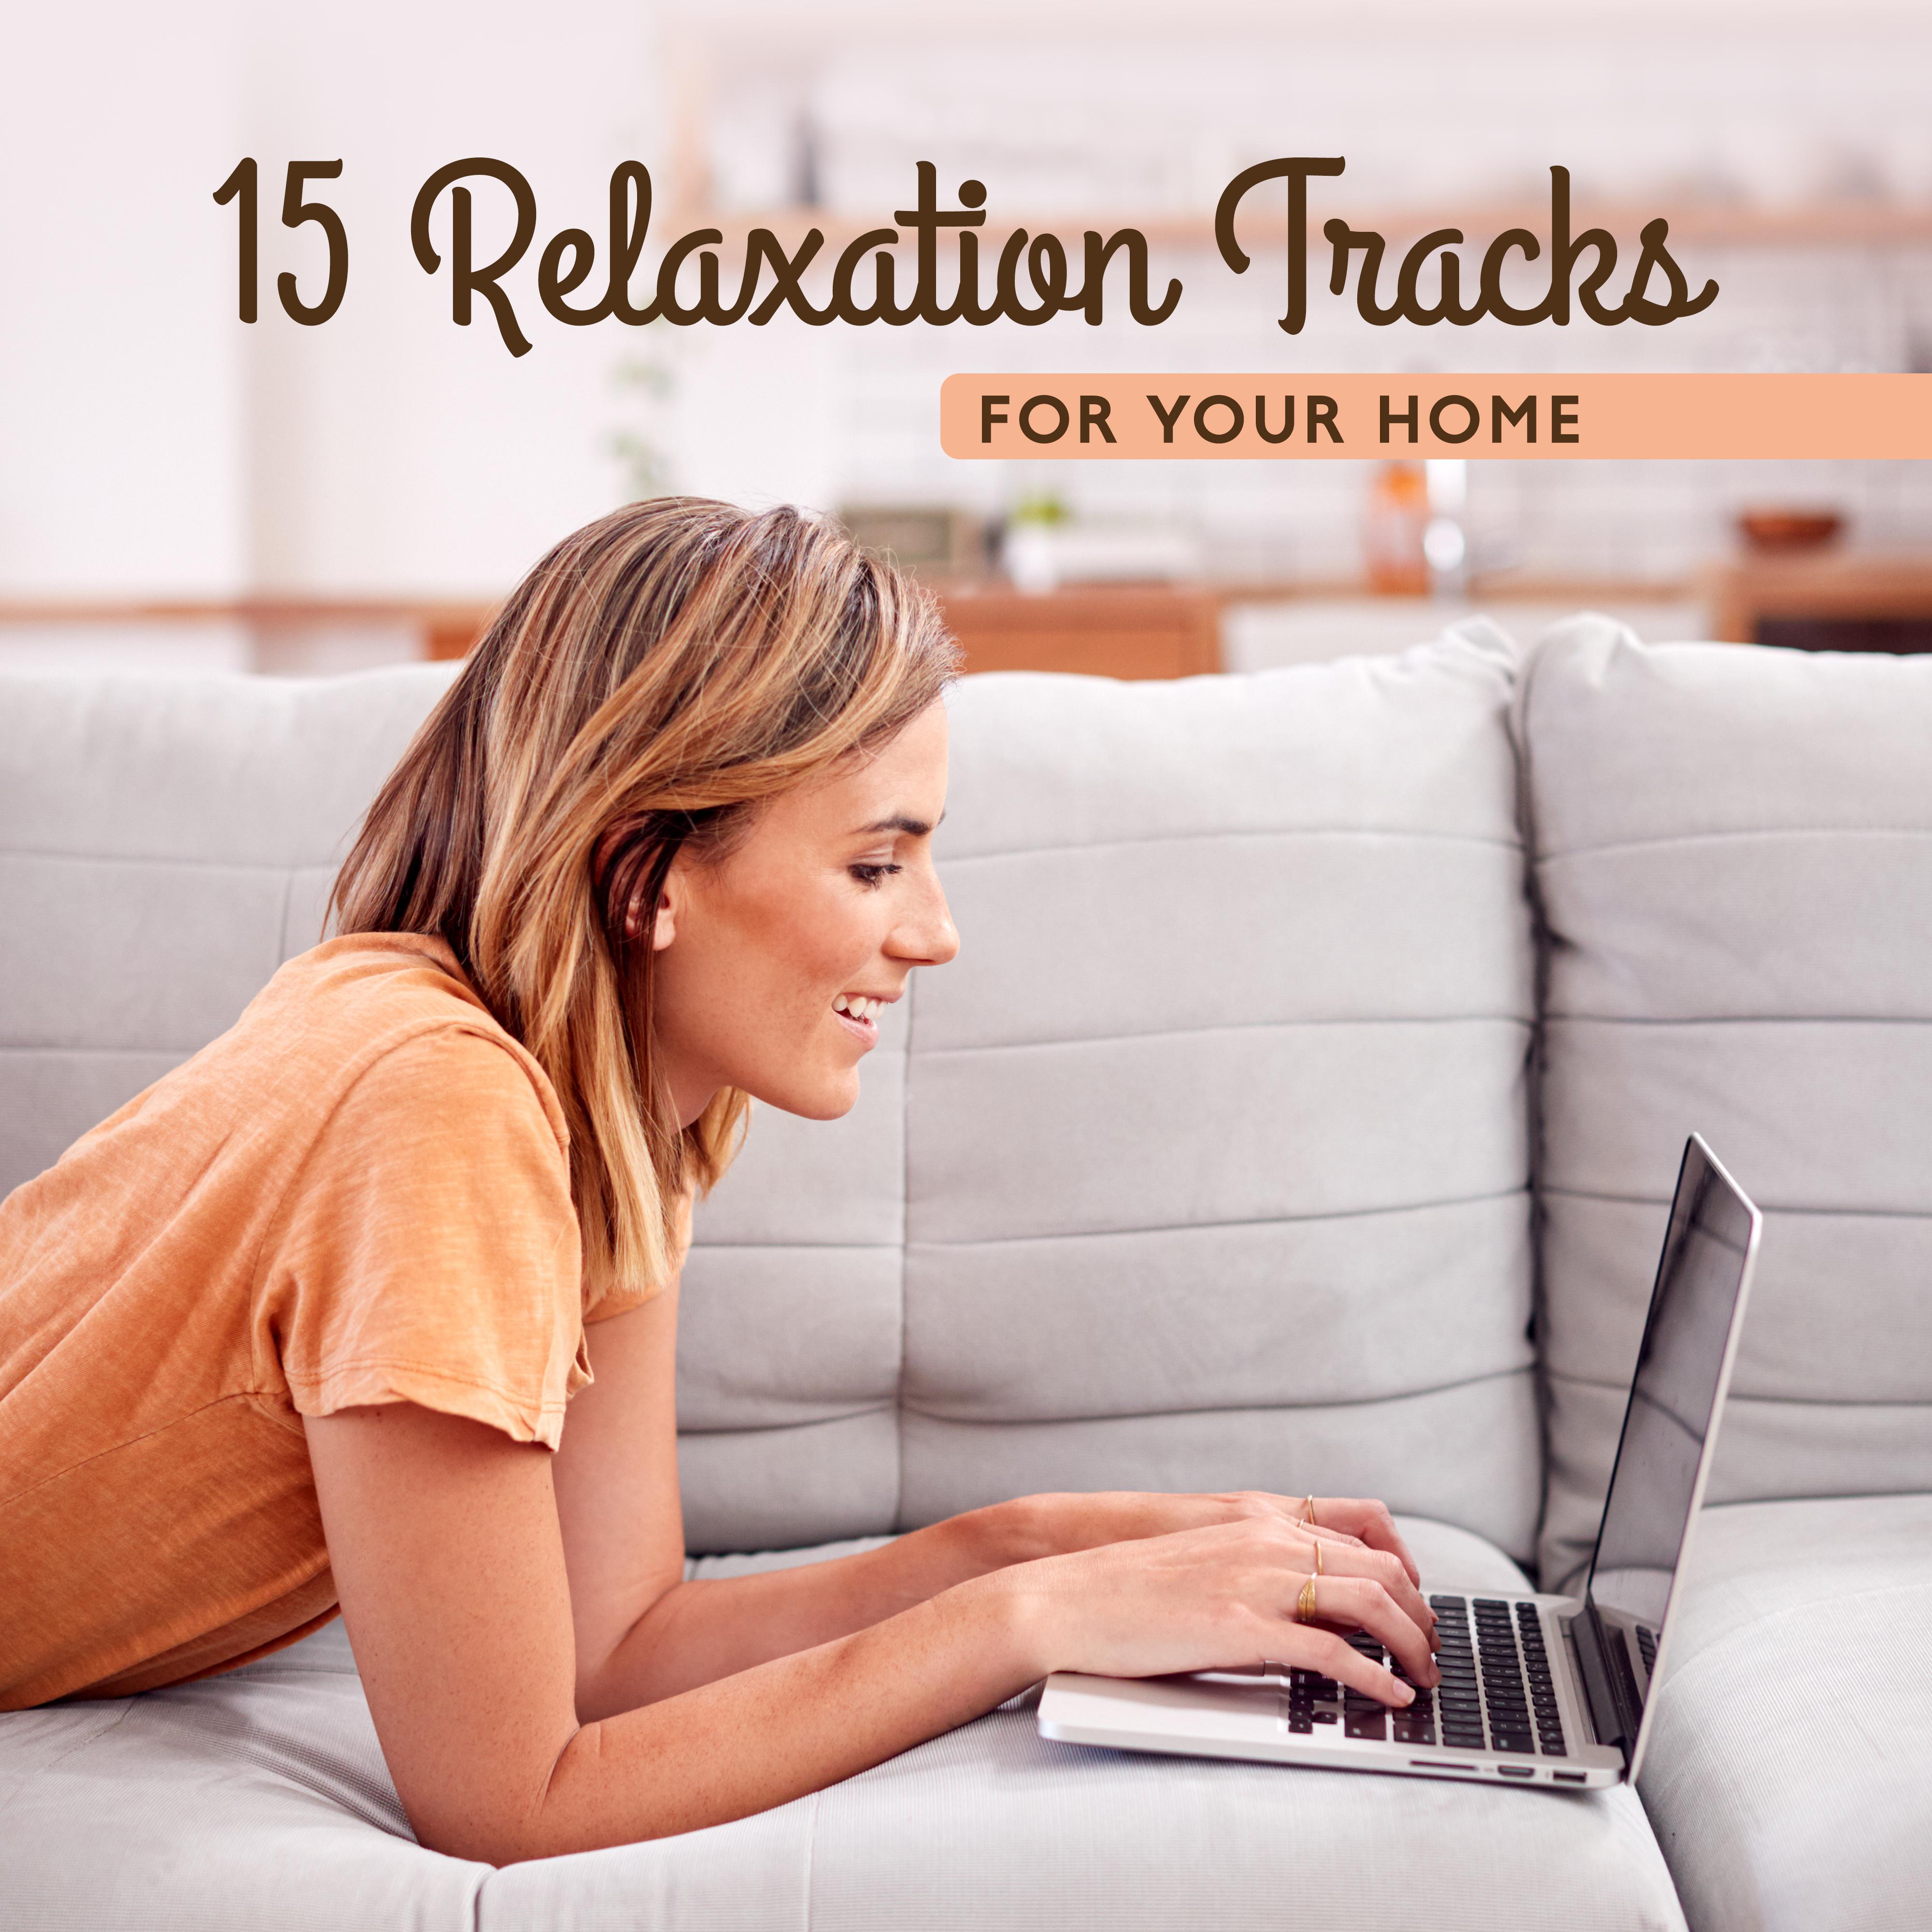 15 Relaxation Tracks for Your Home: 2019 Nature New Age Total Relaxation Music for You, Your Family & Your Home Animals, Rest, Calm Down & Stress Relief